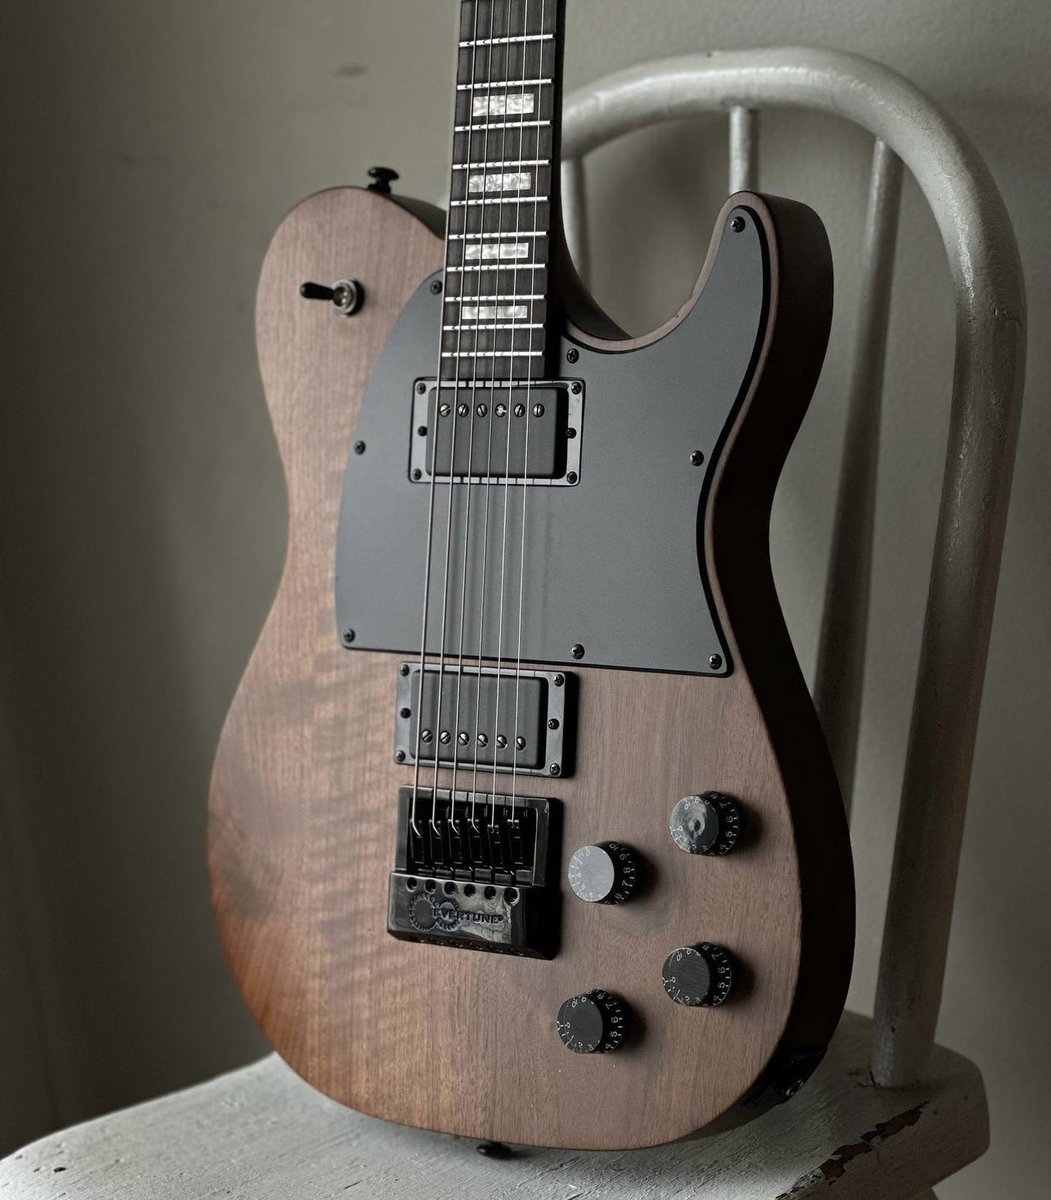 The impressive @JerichoGuitars Fusion Walnut Evertune Baritone guitar features custom black-covered Seymour Duncan JB & '59 Pickups with push/pull pots on each tone knob for coil-tapping. 

Explore new sounds with the legendary '59 Model: hubs.la/Q01RpT7v0